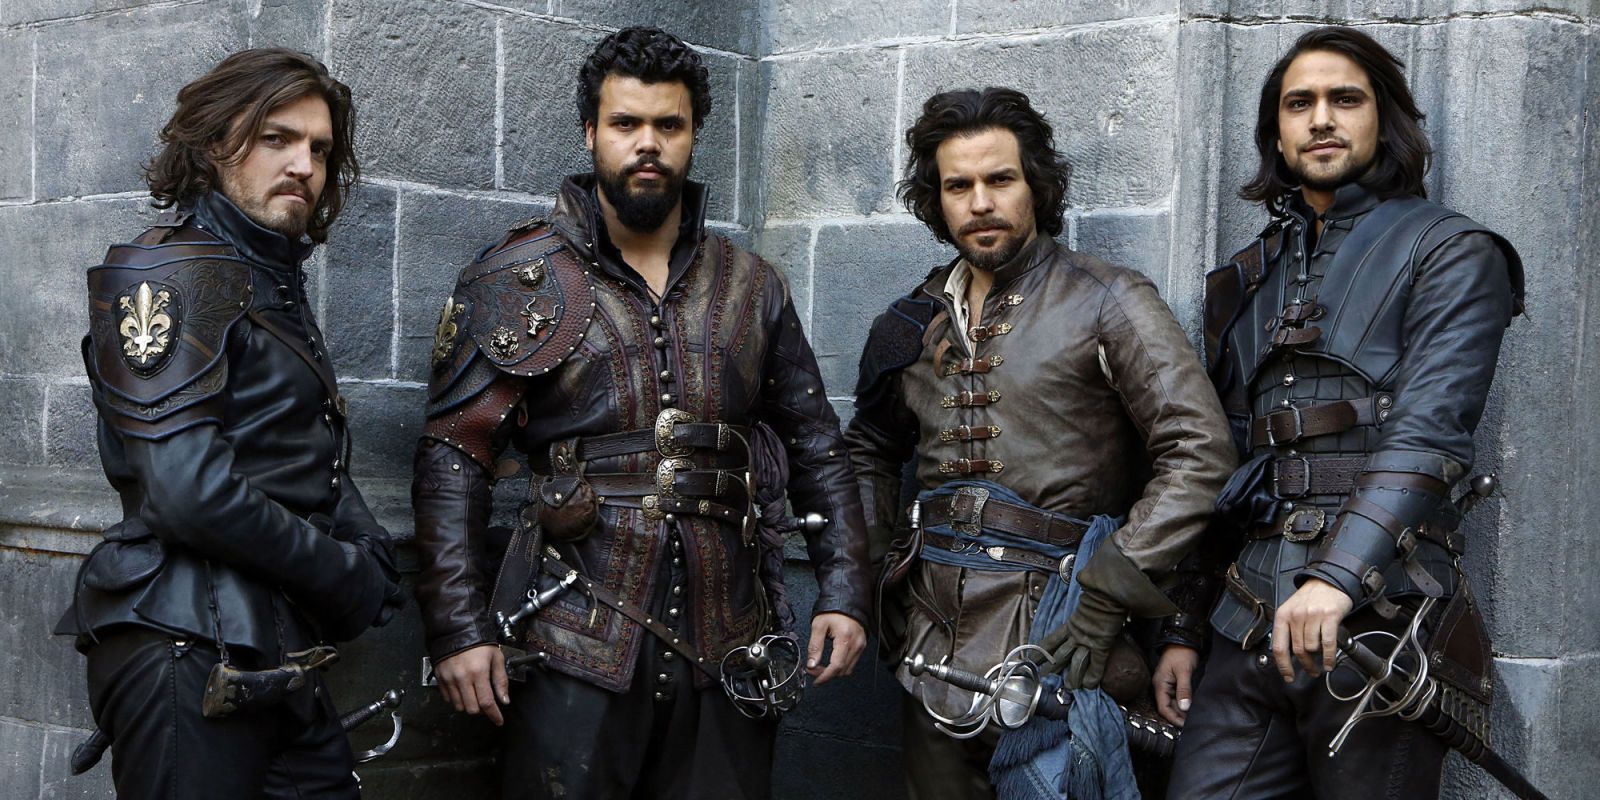 Athos, Aramis, Porthos, and D'Artagnan in The Musketeers.